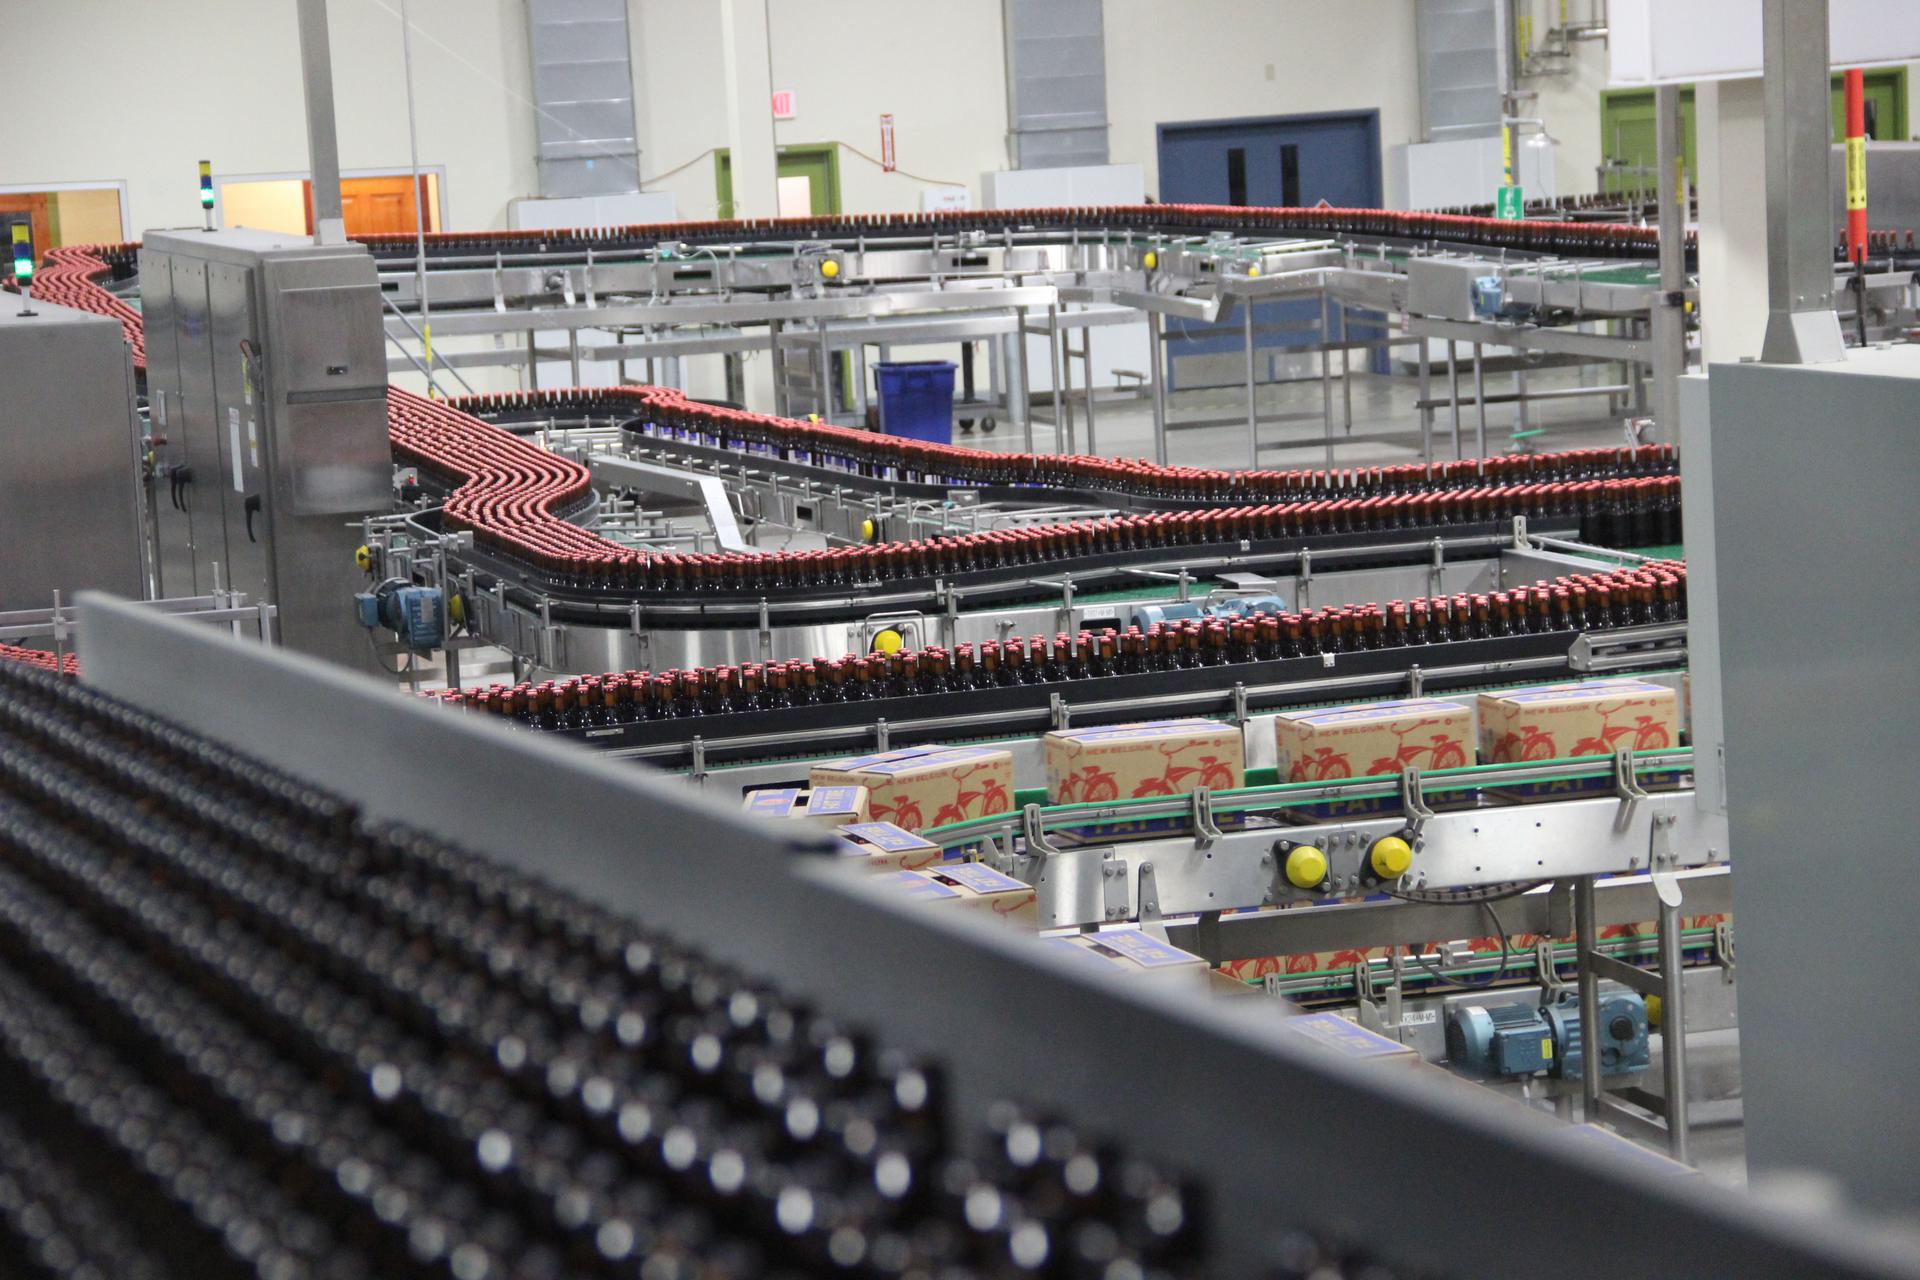 New Belgium Brewing Company’s bottling facility in Fort Collins, Colorado. The company is 100 percent employee owned. Employees are given a free bike on their 1-year work-hire anniversary.